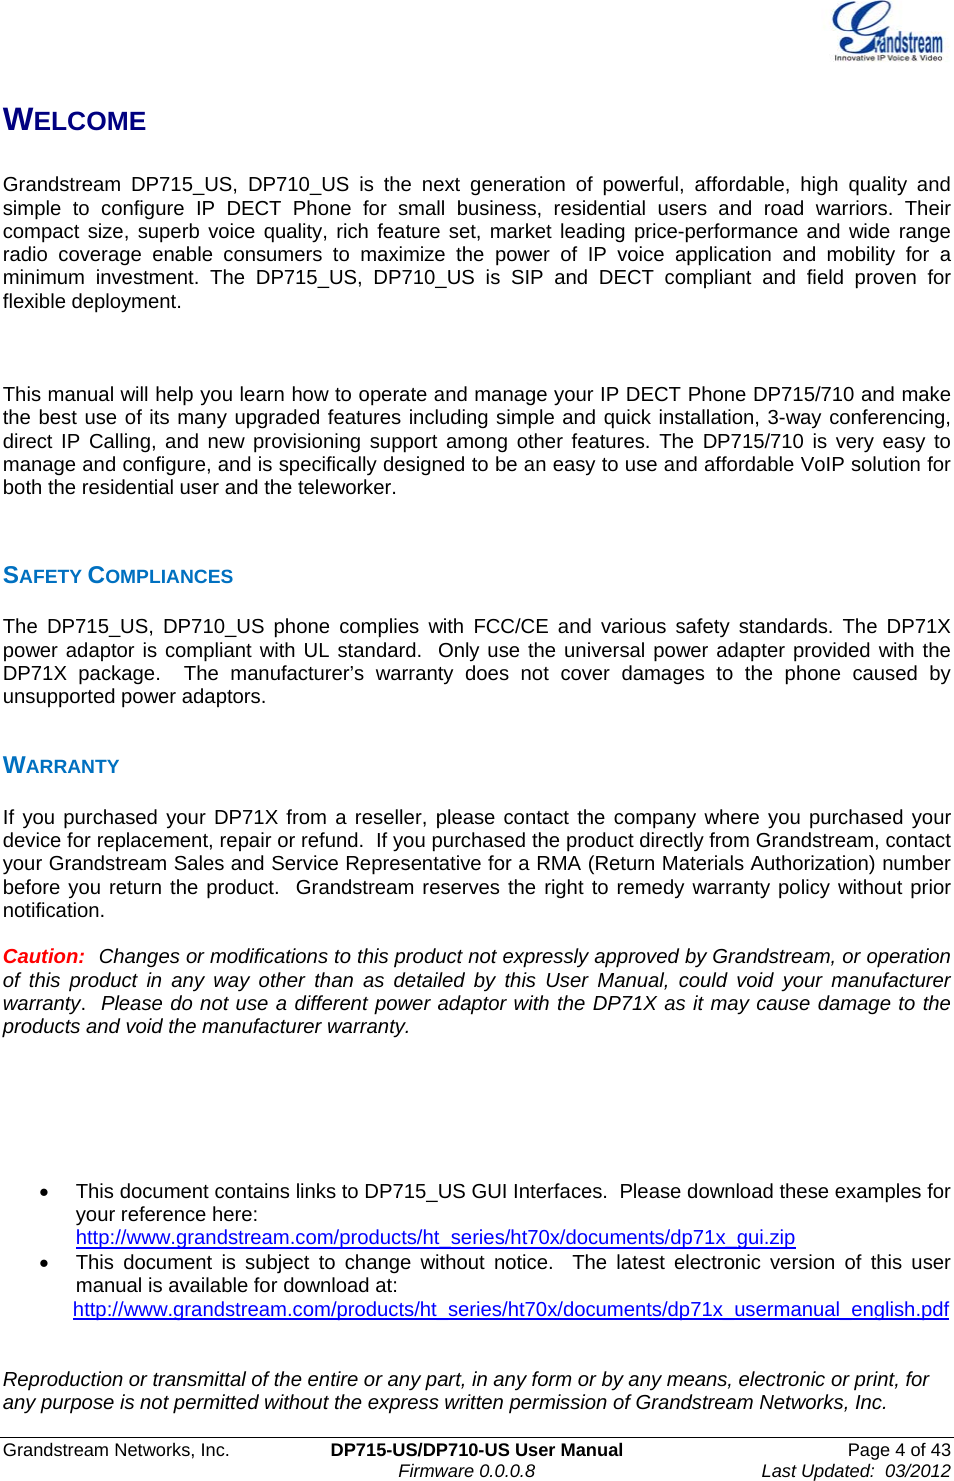  Grandstream Networks, Inc.  DP715-US/DP710-US User Manual  Page 4 of 43                                                                               Firmware 0.0.0.8                                     Last Updated:  03/2012 WELCOME  Grandstream DP715_US, DP710_US is the next generation of powerful, affordable, high quality and simple to configure IP DECT Phone for small business, residential users and road warriors. Their compact size, superb voice quality, rich feature set, market leading price-performance and wide range radio coverage enable consumers to maximize the power of IP voice application and mobility for a minimum investment. The DP715_US, DP710_US is SIP and DECT compliant and field proven for flexible deployment.    This manual will help you learn how to operate and manage your IP DECT Phone DP715/710 and make the best use of its many upgraded features including simple and quick installation, 3-way conferencing, direct IP Calling, and new provisioning support among other features. The DP715/710 is very easy to manage and configure, and is specifically designed to be an easy to use and affordable VoIP solution for both the residential user and the teleworker.   SAFETY COMPLIANCES The DP715_US, DP710_US phone complies with FCC/CE and various safety standards. The DP71X power adaptor is compliant with UL standard.  Only use the universal power adapter provided with the DP71X package.  The manufacturer’s warranty does not cover damages to the phone caused by unsupported power adaptors.  WARRANTY If you purchased your DP71X from a reseller, please contact the company where you purchased your device for replacement, repair or refund.  If you purchased the product directly from Grandstream, contact your Grandstream Sales and Service Representative for a RMA (Return Materials Authorization) number before you return the product.  Grandstream reserves the right to remedy warranty policy without prior notification.  Caution:  Changes or modifications to this product not expressly approved by Grandstream, or operation of this product in any way other than as detailed by this User Manual, could void your manufacturer warranty.  Please do not use a different power adaptor with the DP71X as it may cause damage to the products and void the manufacturer warranty.       •  This document contains links to DP715_US GUI Interfaces.  Please download these examples for your reference here:  http://www.grandstream.com/products/ht_series/ht70x/documents/dp71x_gui.zip  •  This document is subject to change without notice.  The latest electronic version of this user manual is available for download at:       http://www.grandstream.com/products/ht_series/ht70x/documents/dp71x_usermanual_english.pdf    Reproduction or transmittal of the entire or any part, in any form or by any means, electronic or print, for any purpose is not permitted without the express written permission of Grandstream Networks, Inc. 